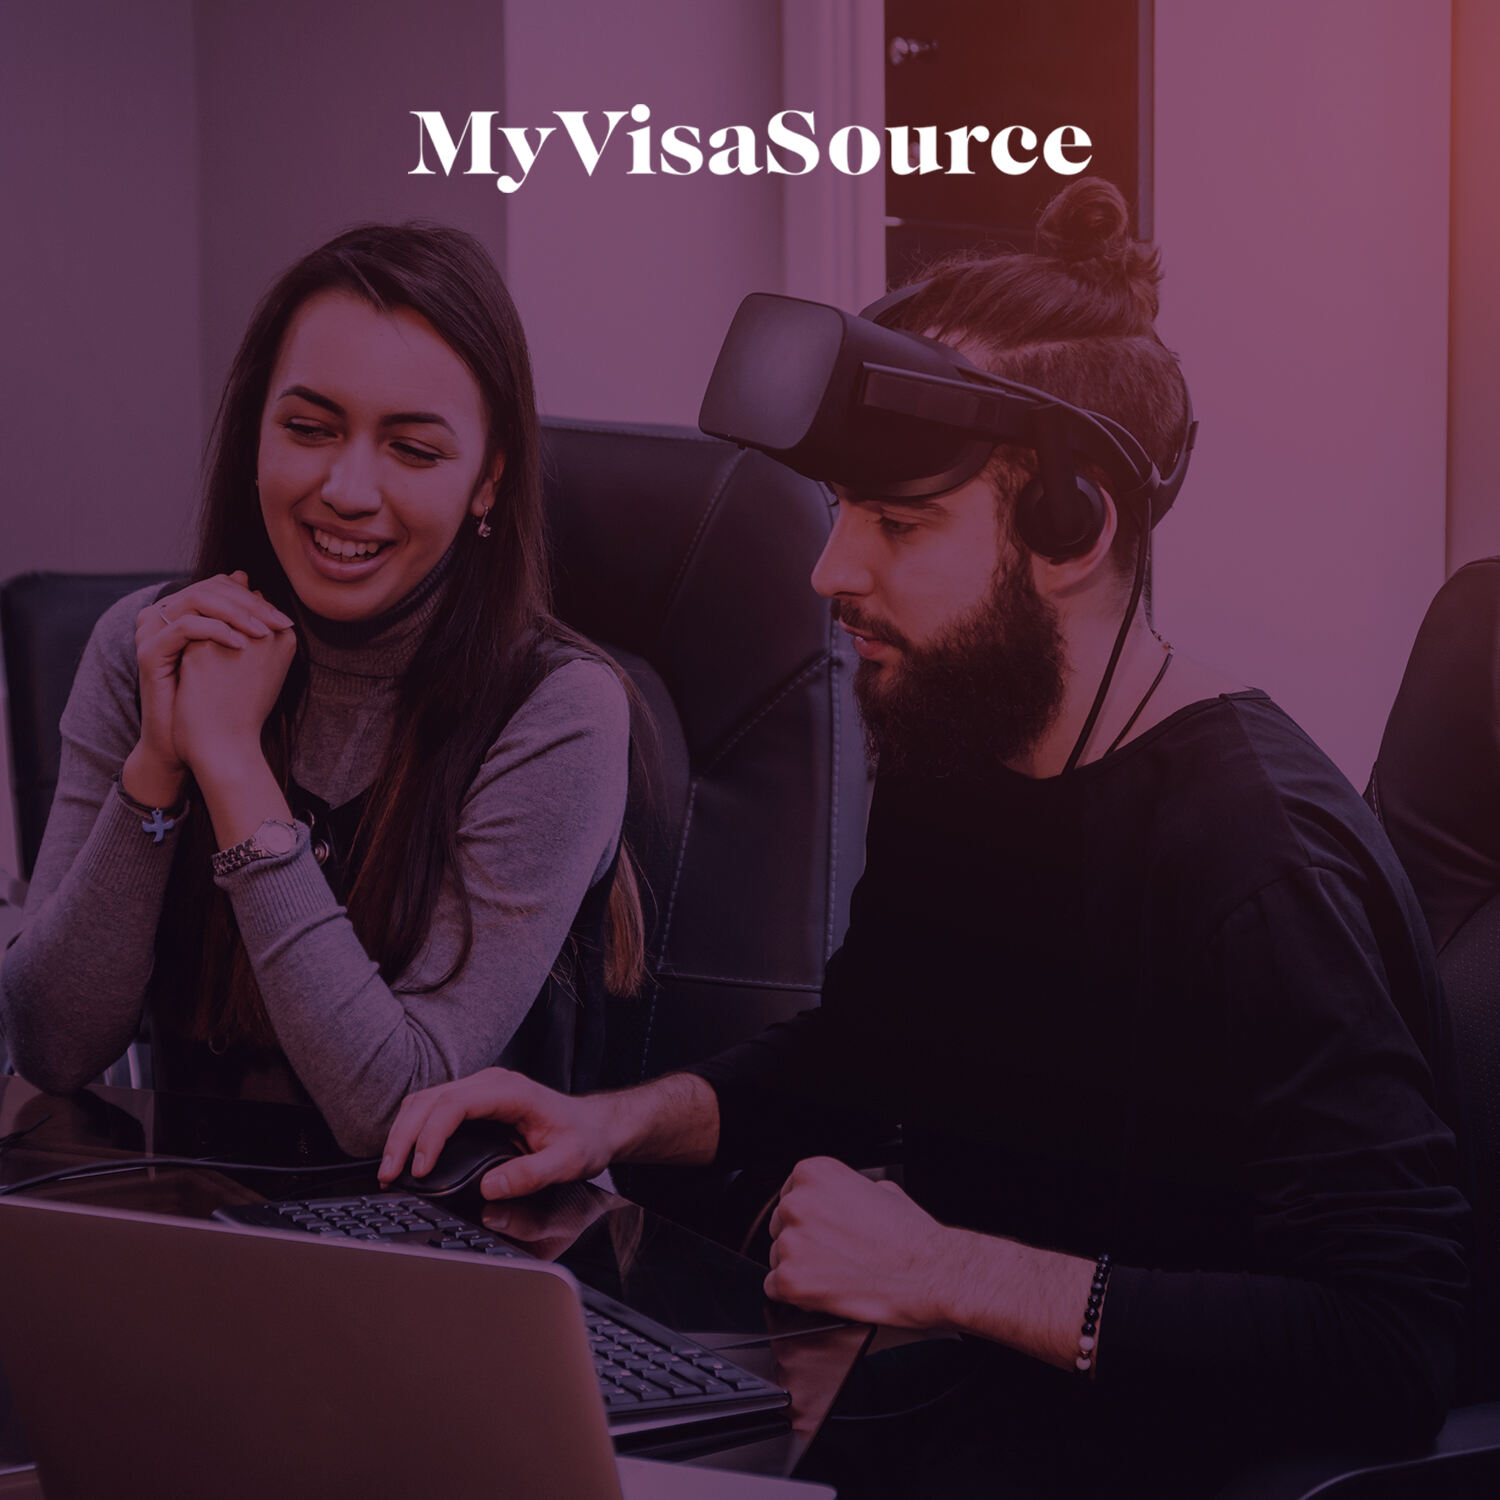 video game developers working over laptops my visa source